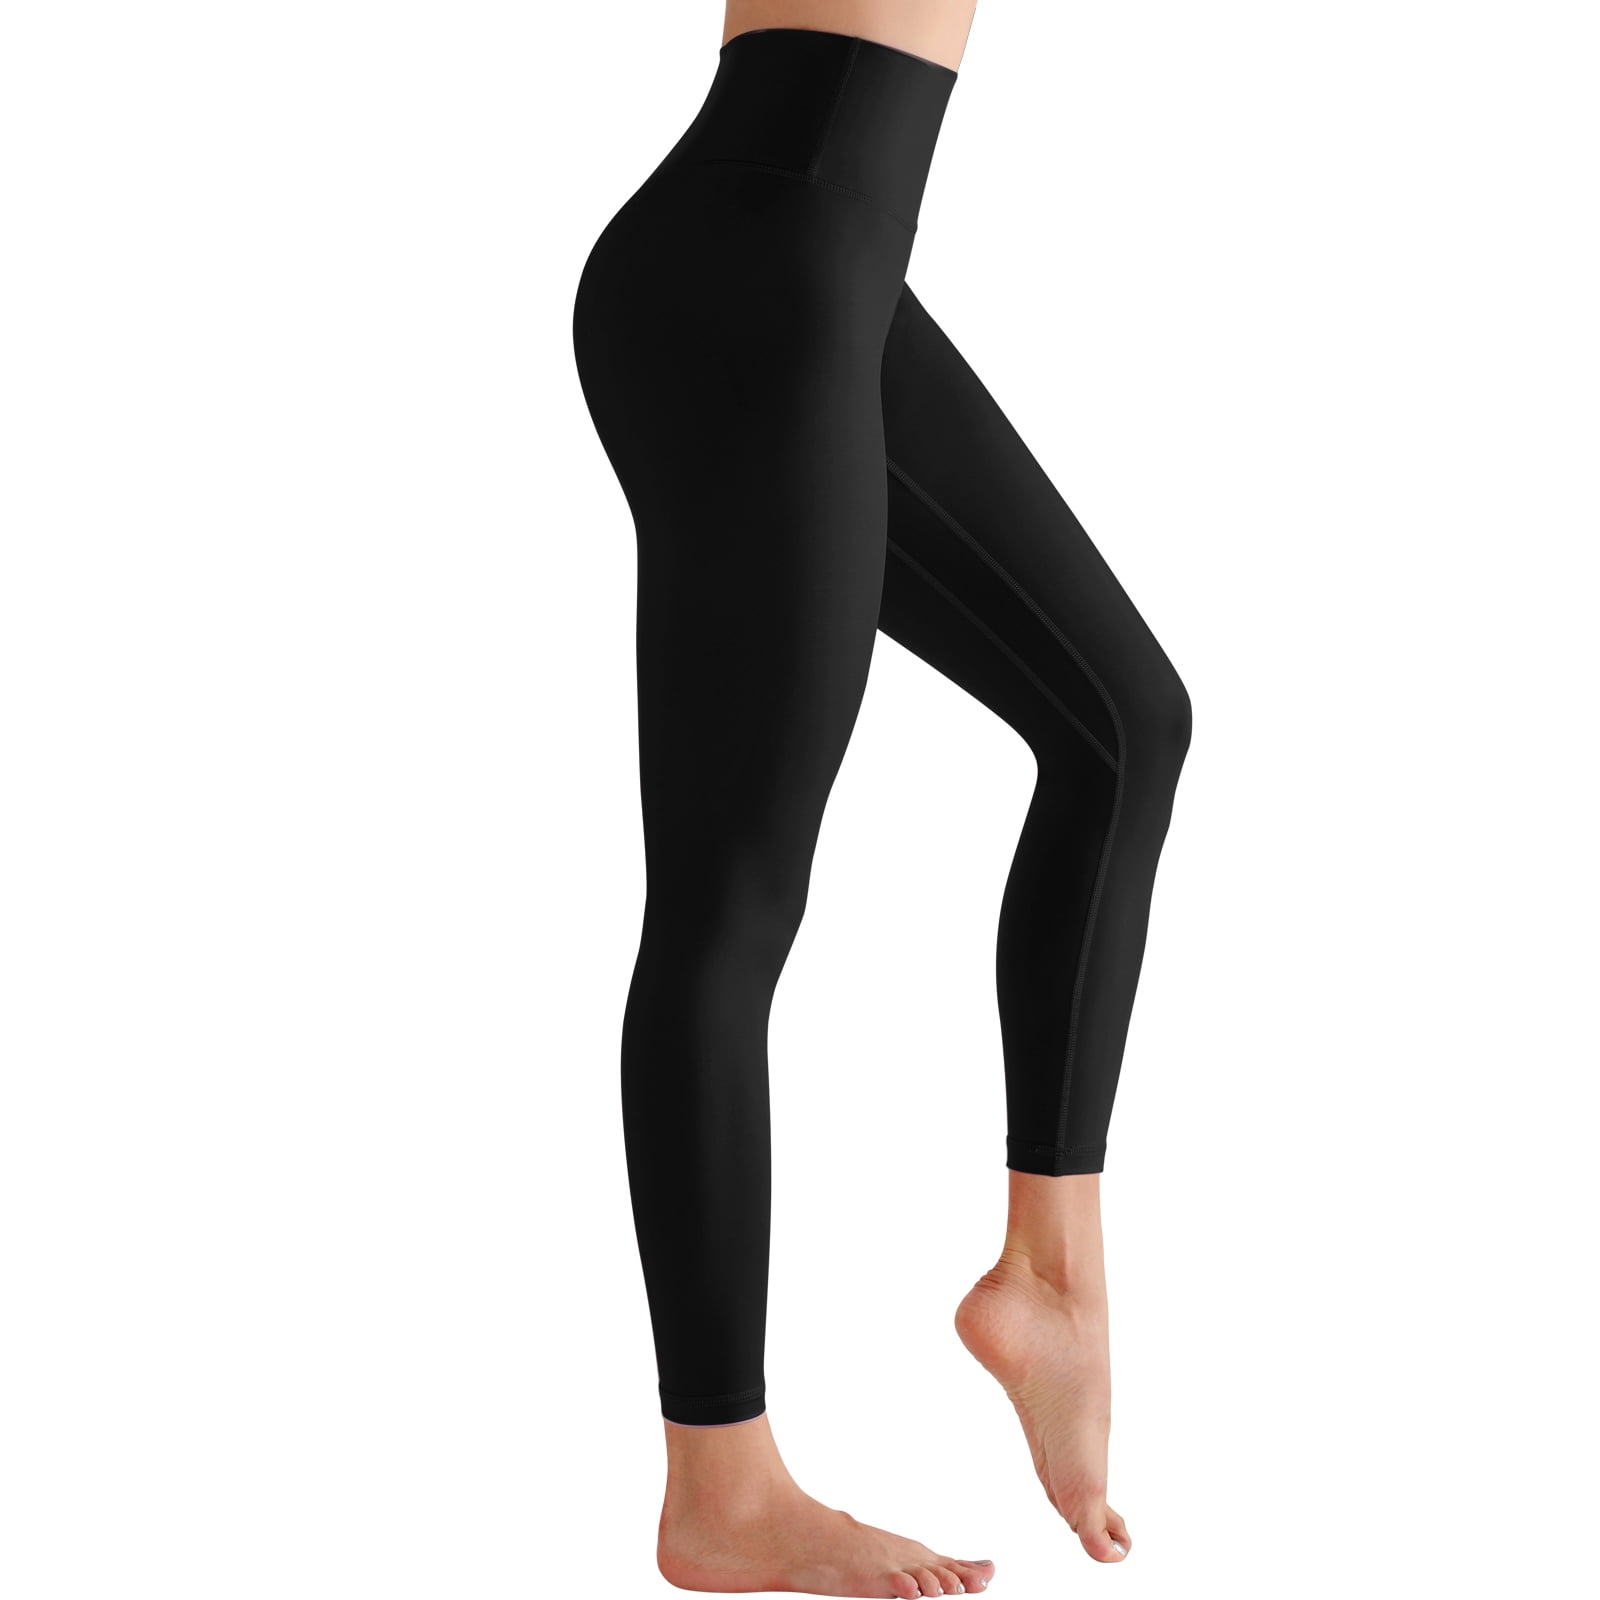 Black High Waisted GYM Leggings, women's high waisted workout leggings –  Tagged Product Type_Leggings